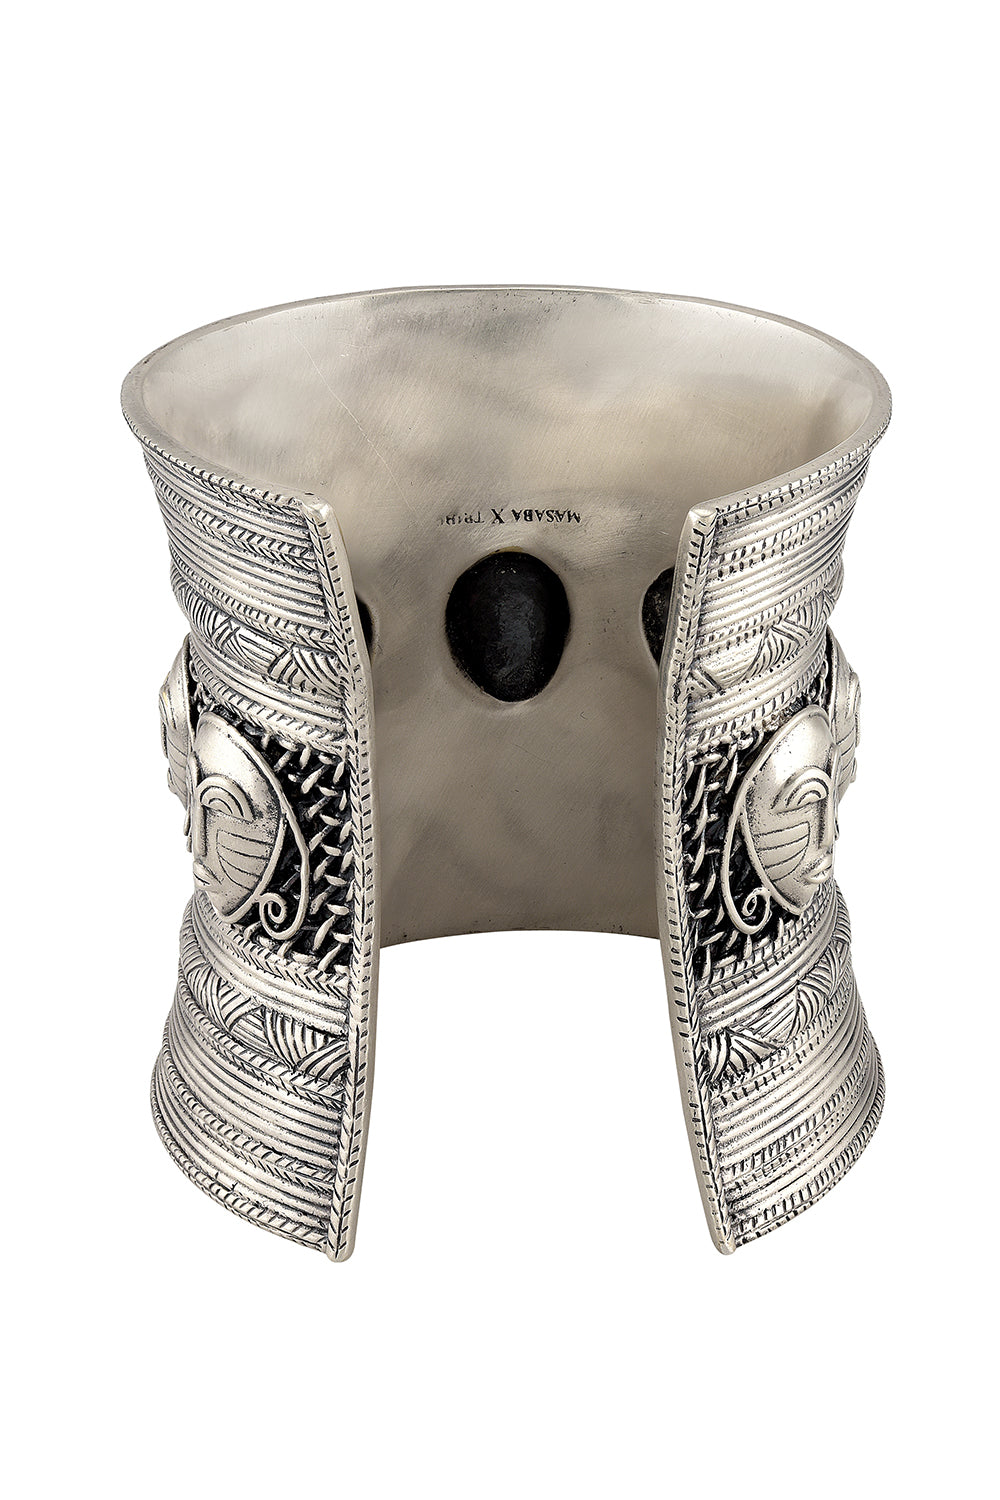 Tribal Mask Silver Plated Cuff